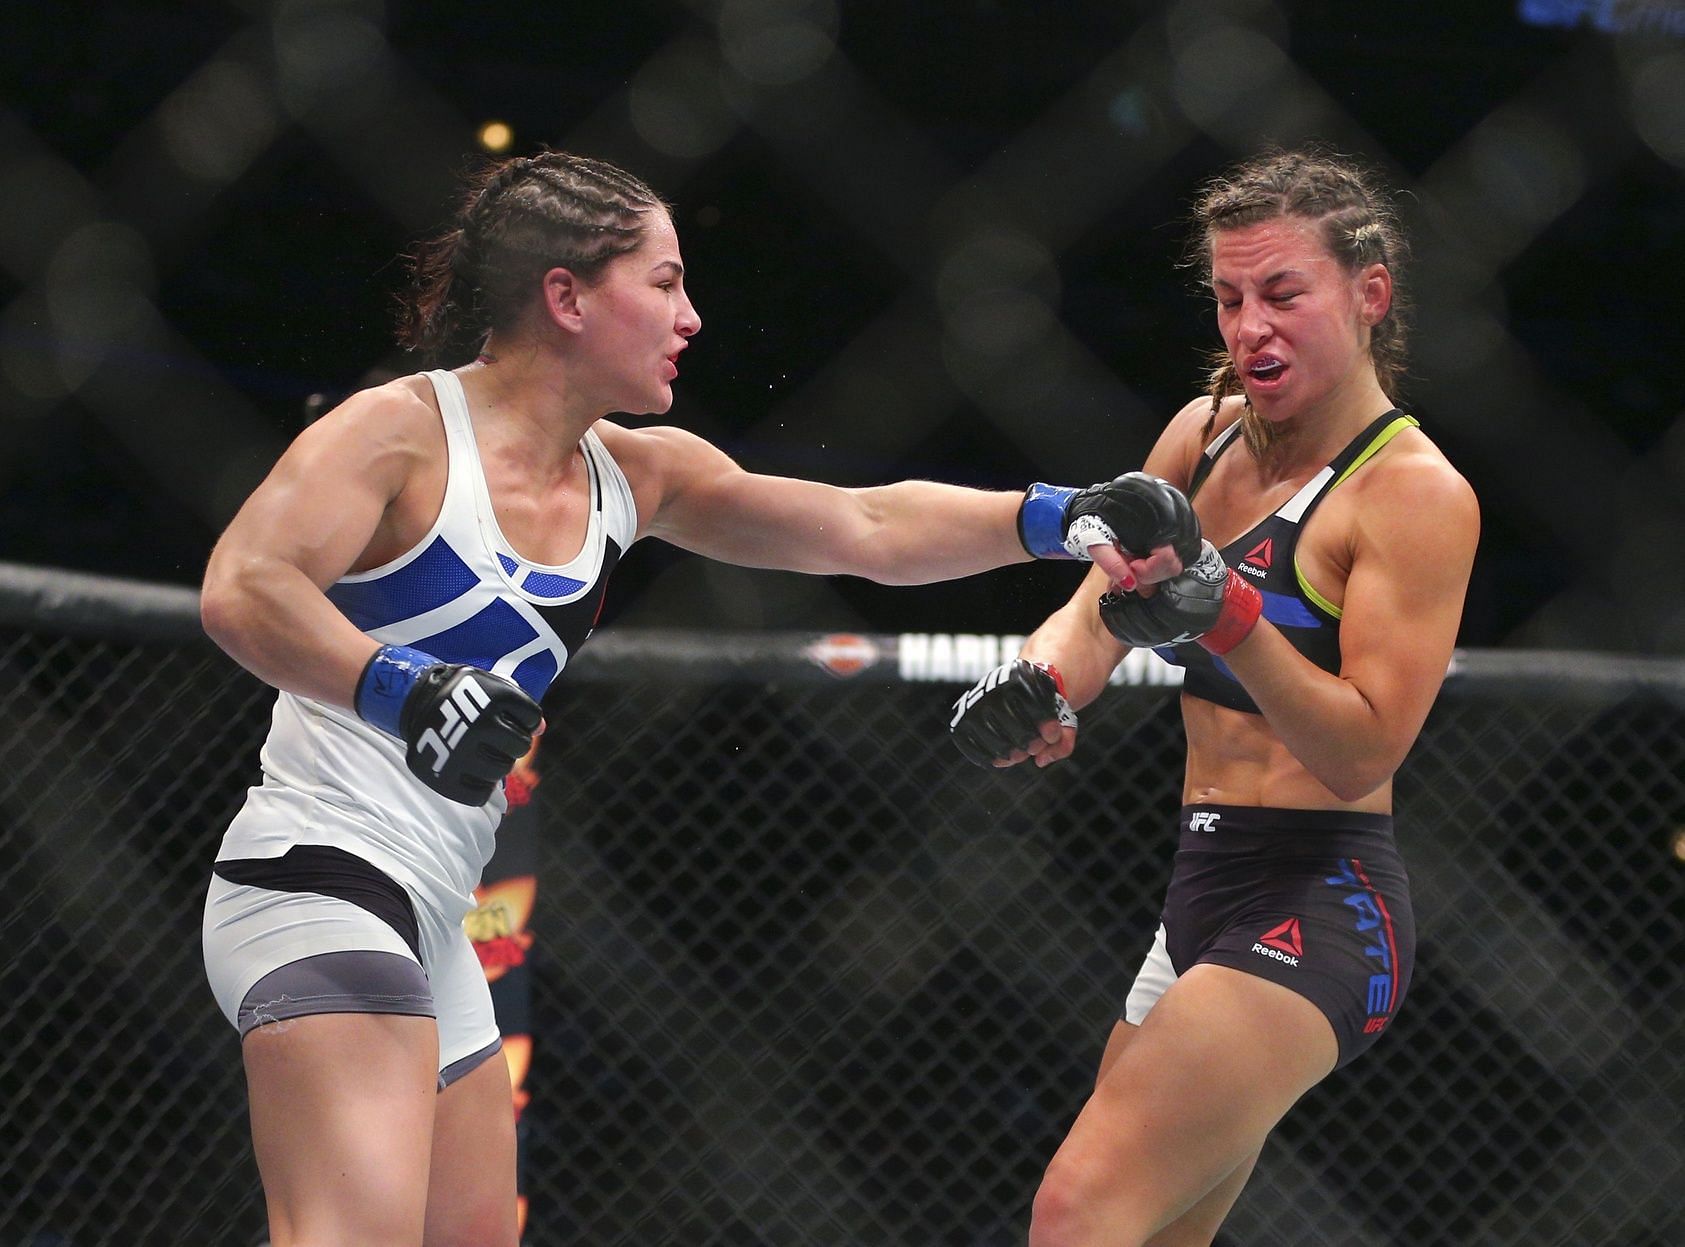 The UFC&#039;s most logical option for Miesha Tate could be to allow Jessica Eye to rematch her on late notice